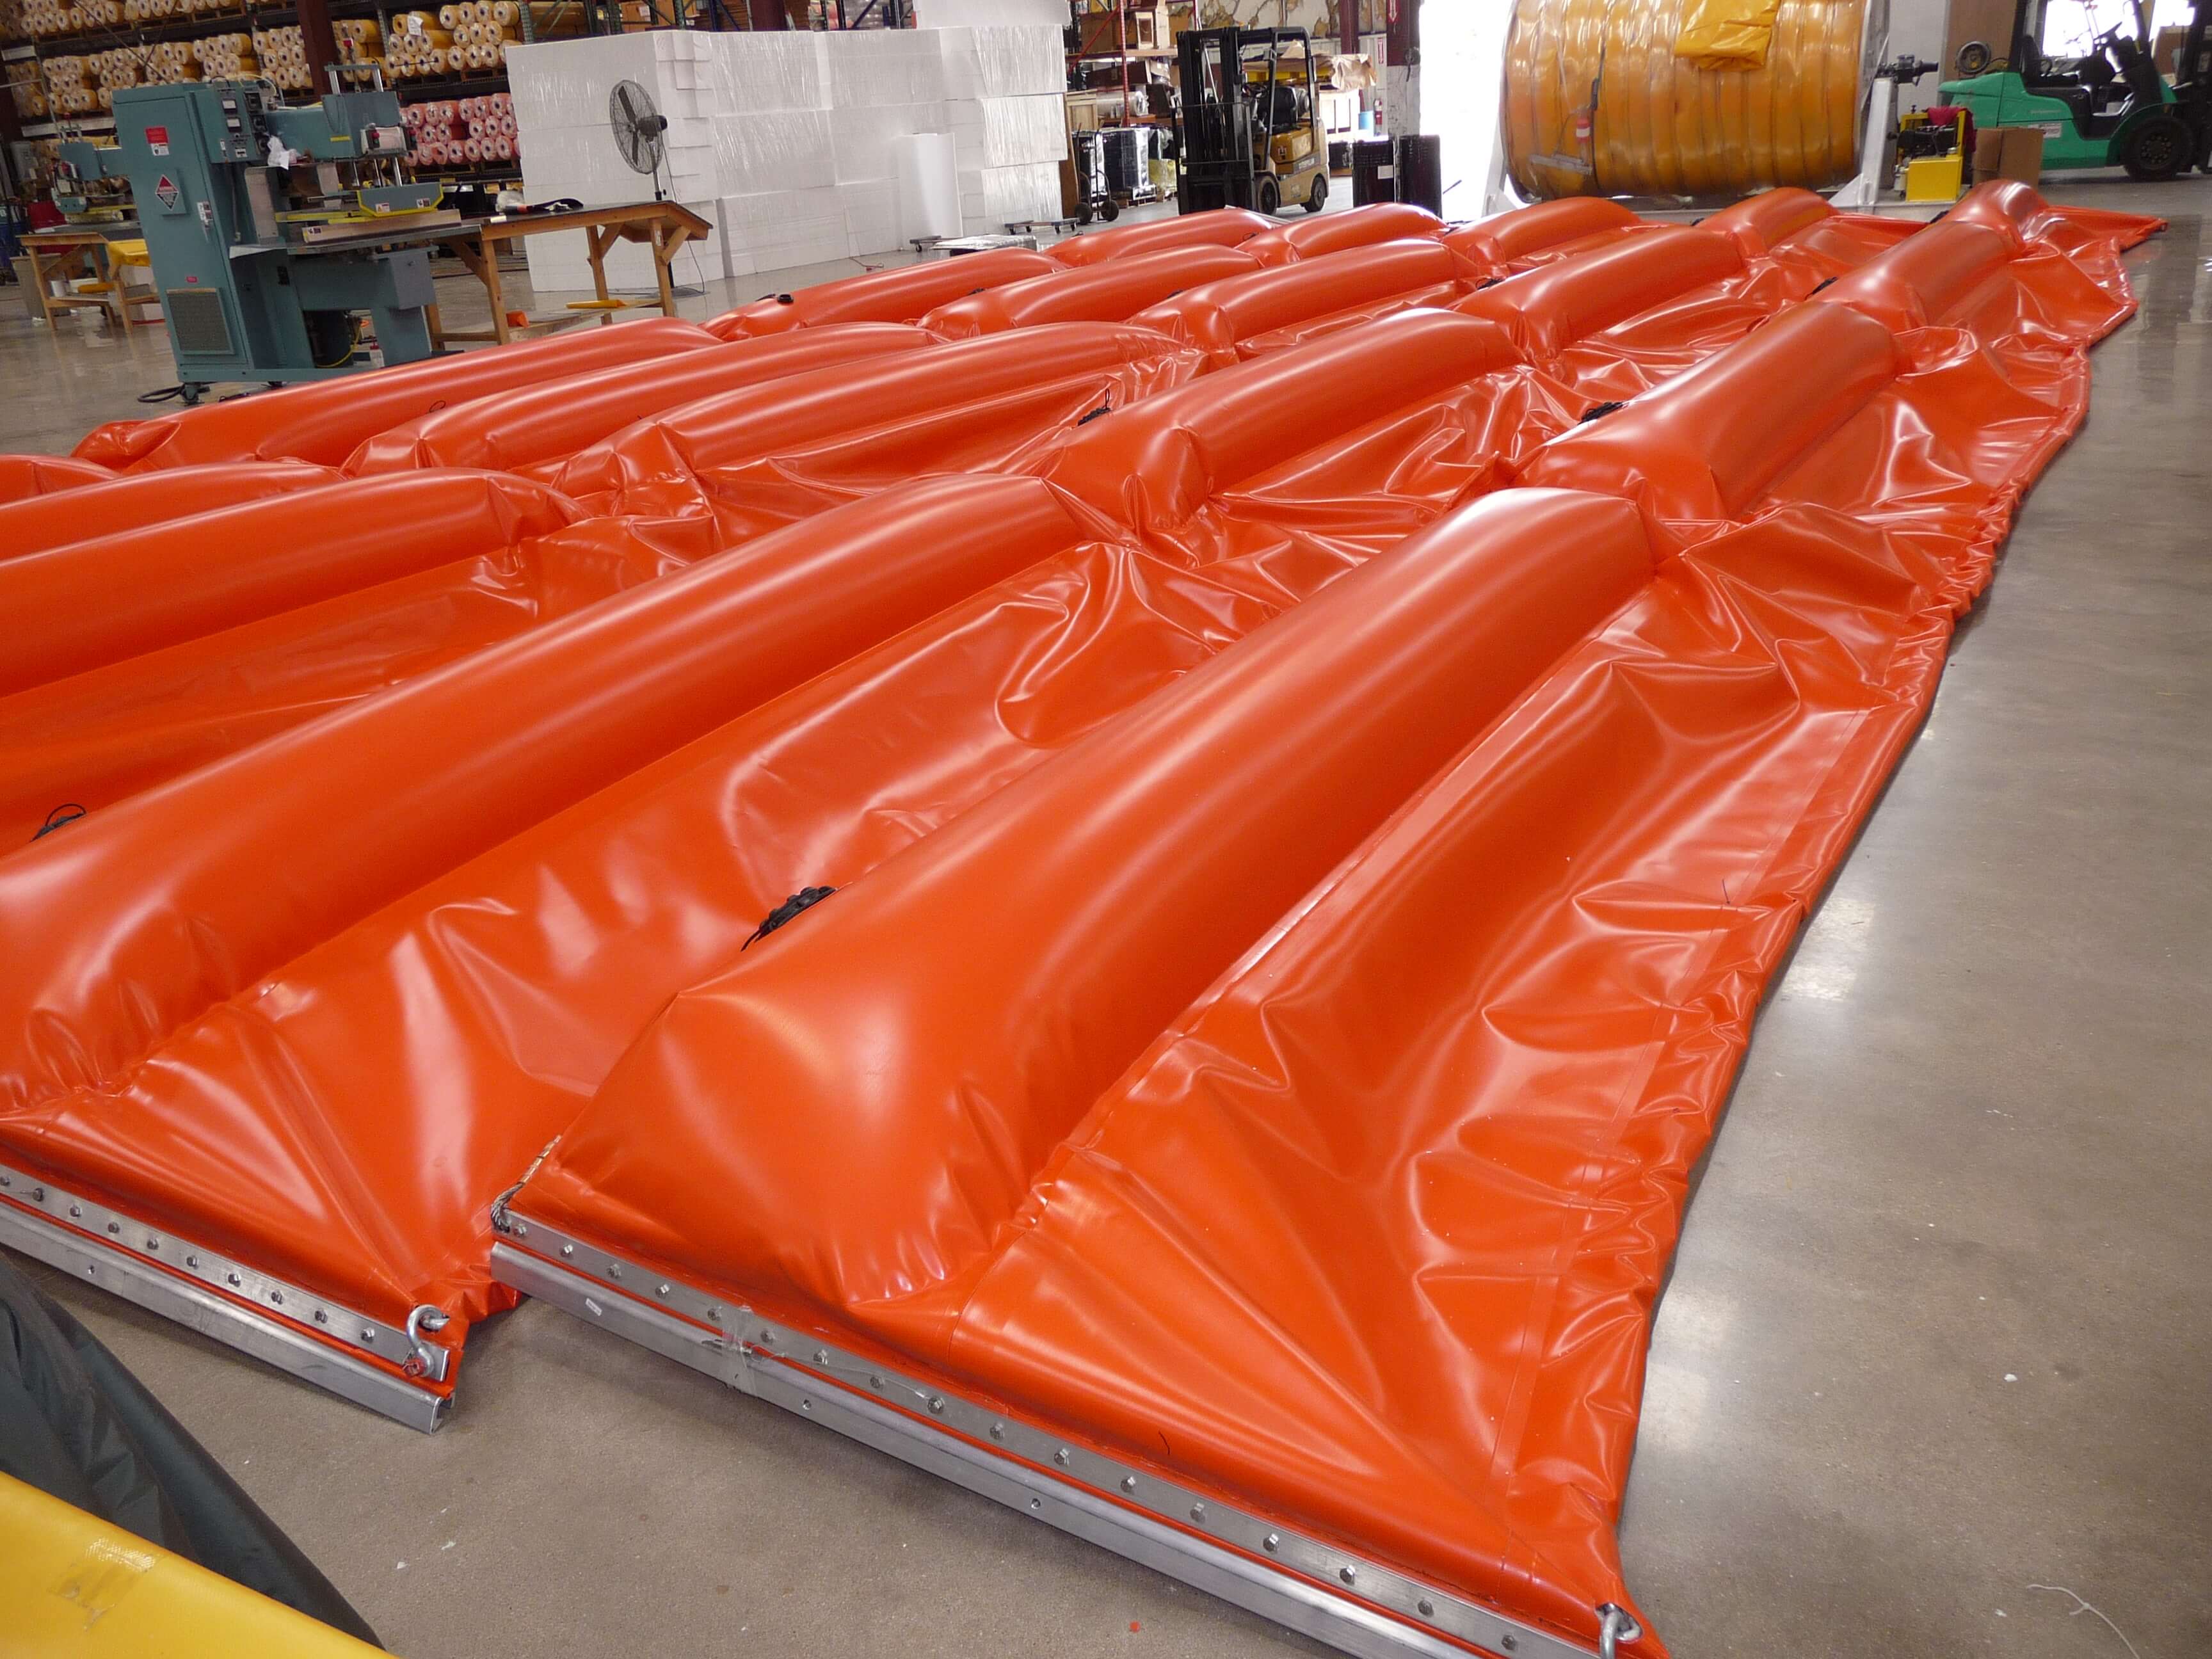 Inflatable Containment Boom